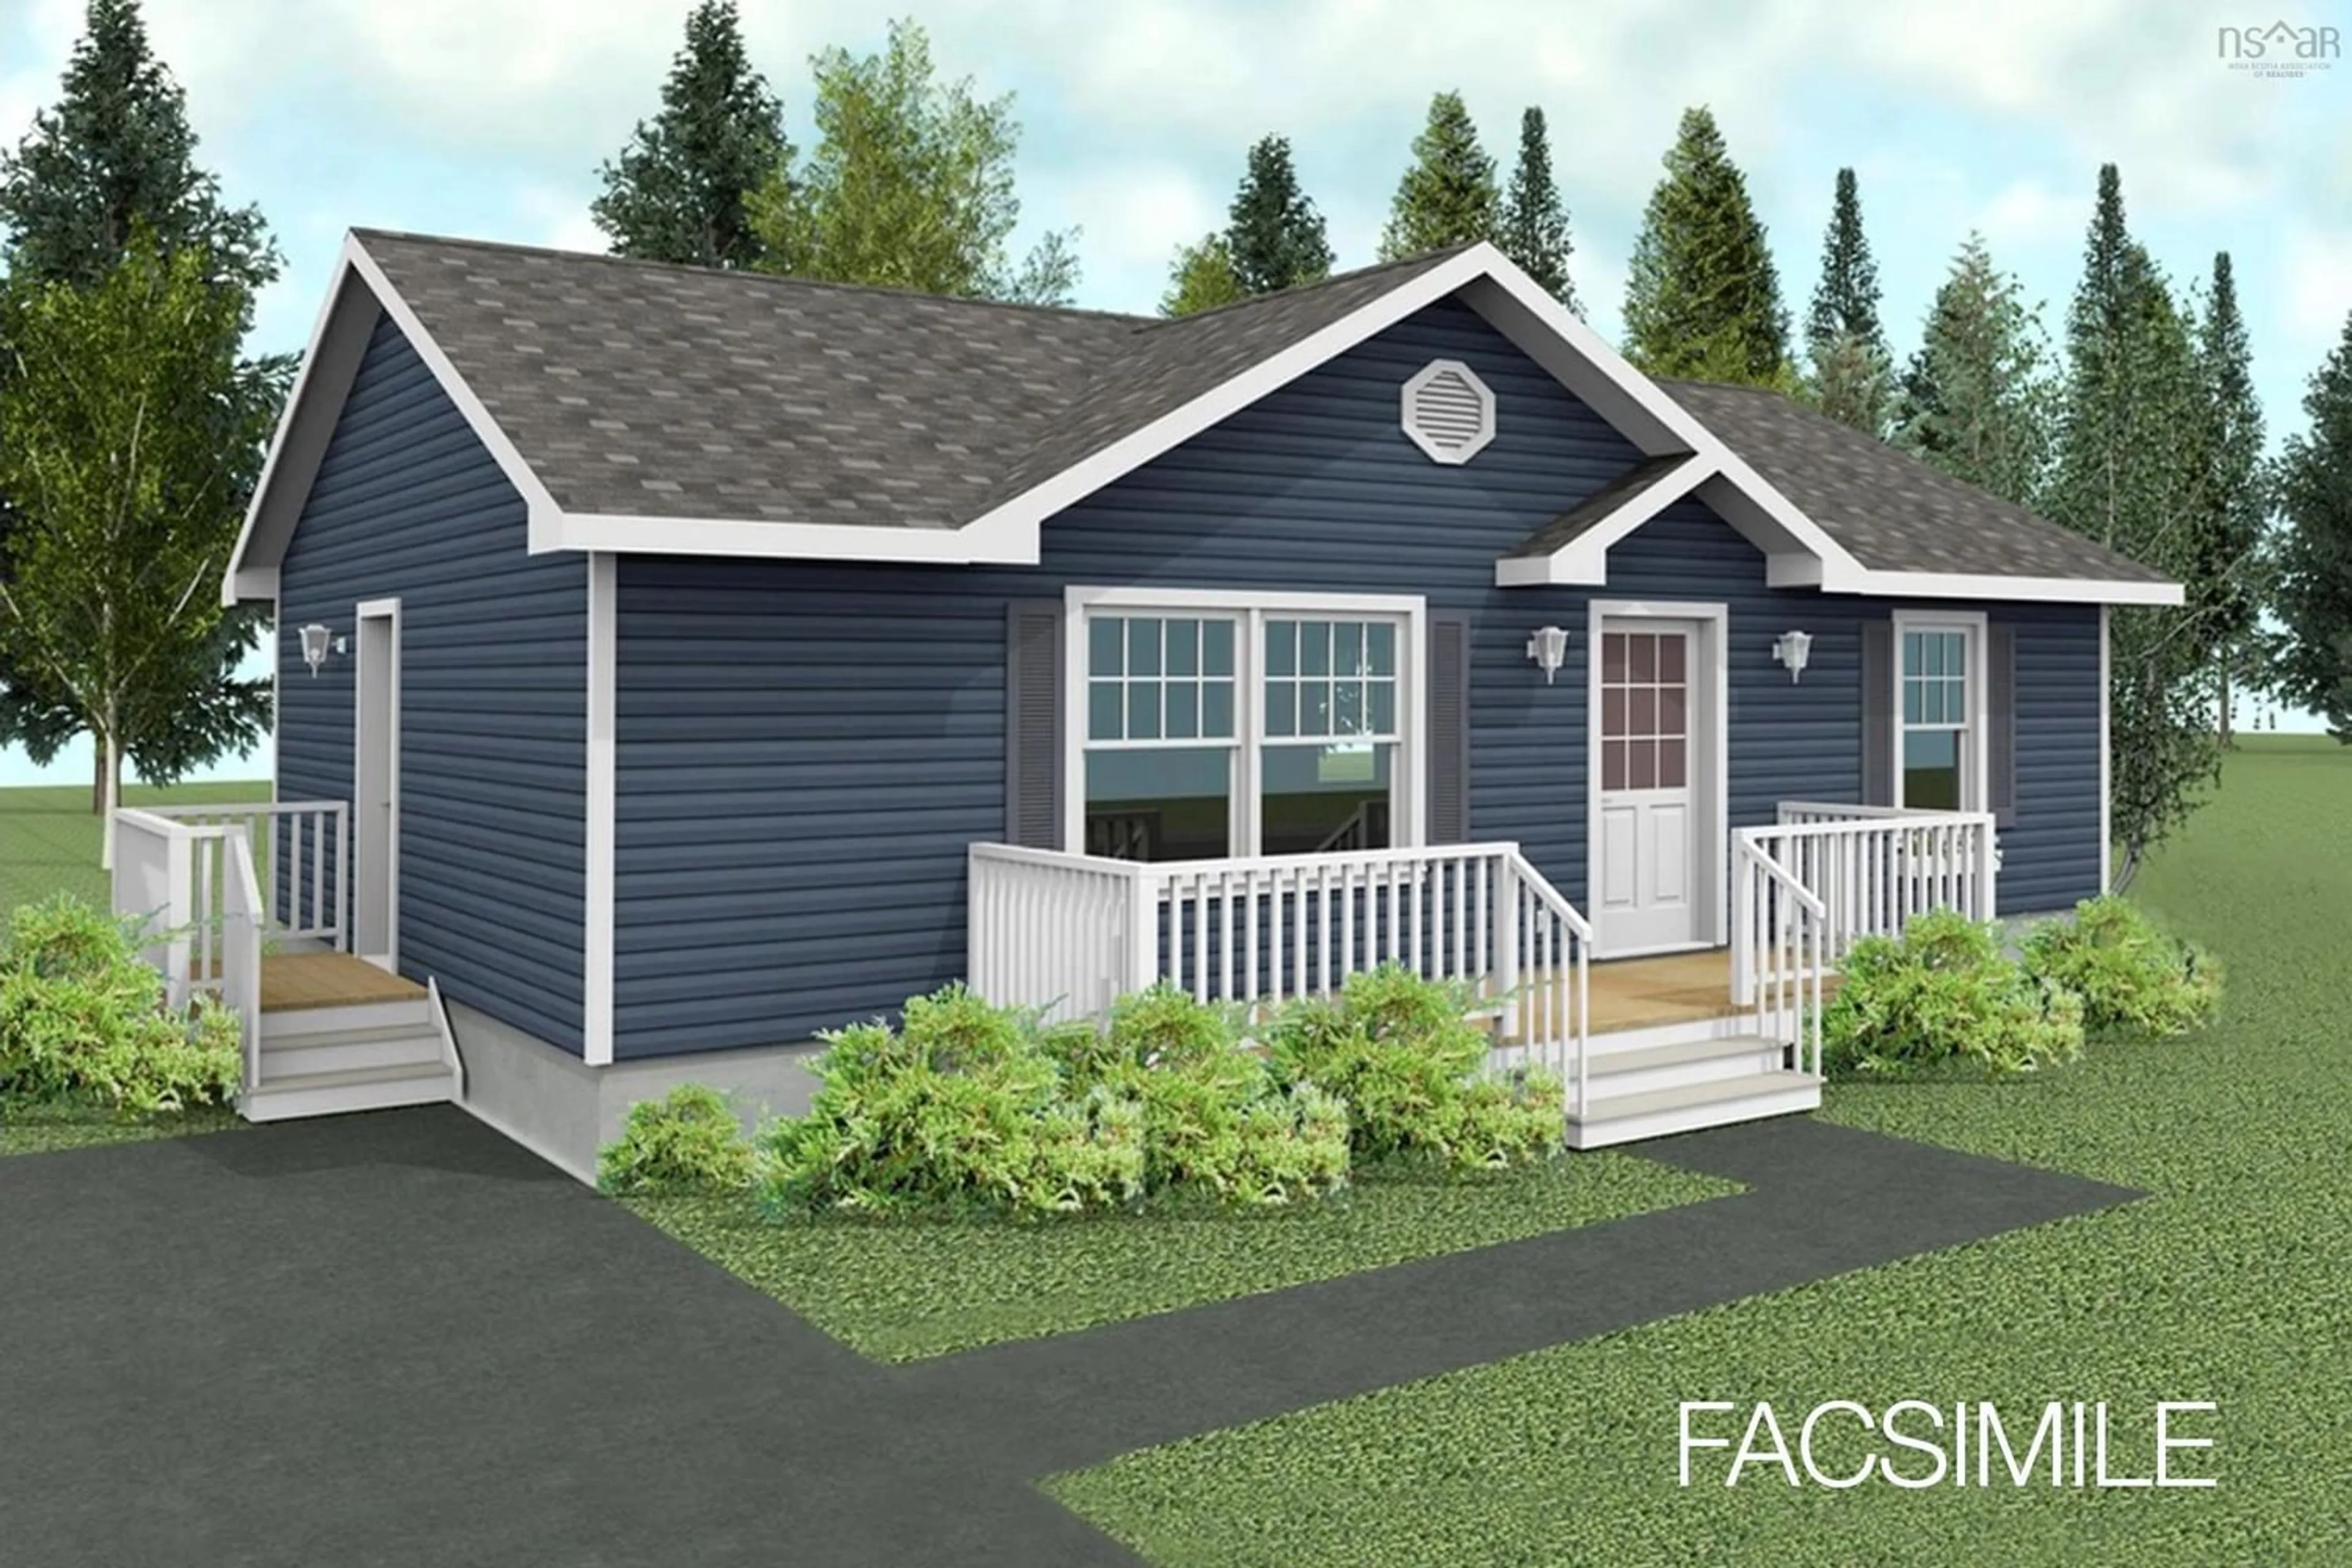 Home with vinyl exterior material for Russell St #24-6, Amherst Nova Scotia B4H 2S5